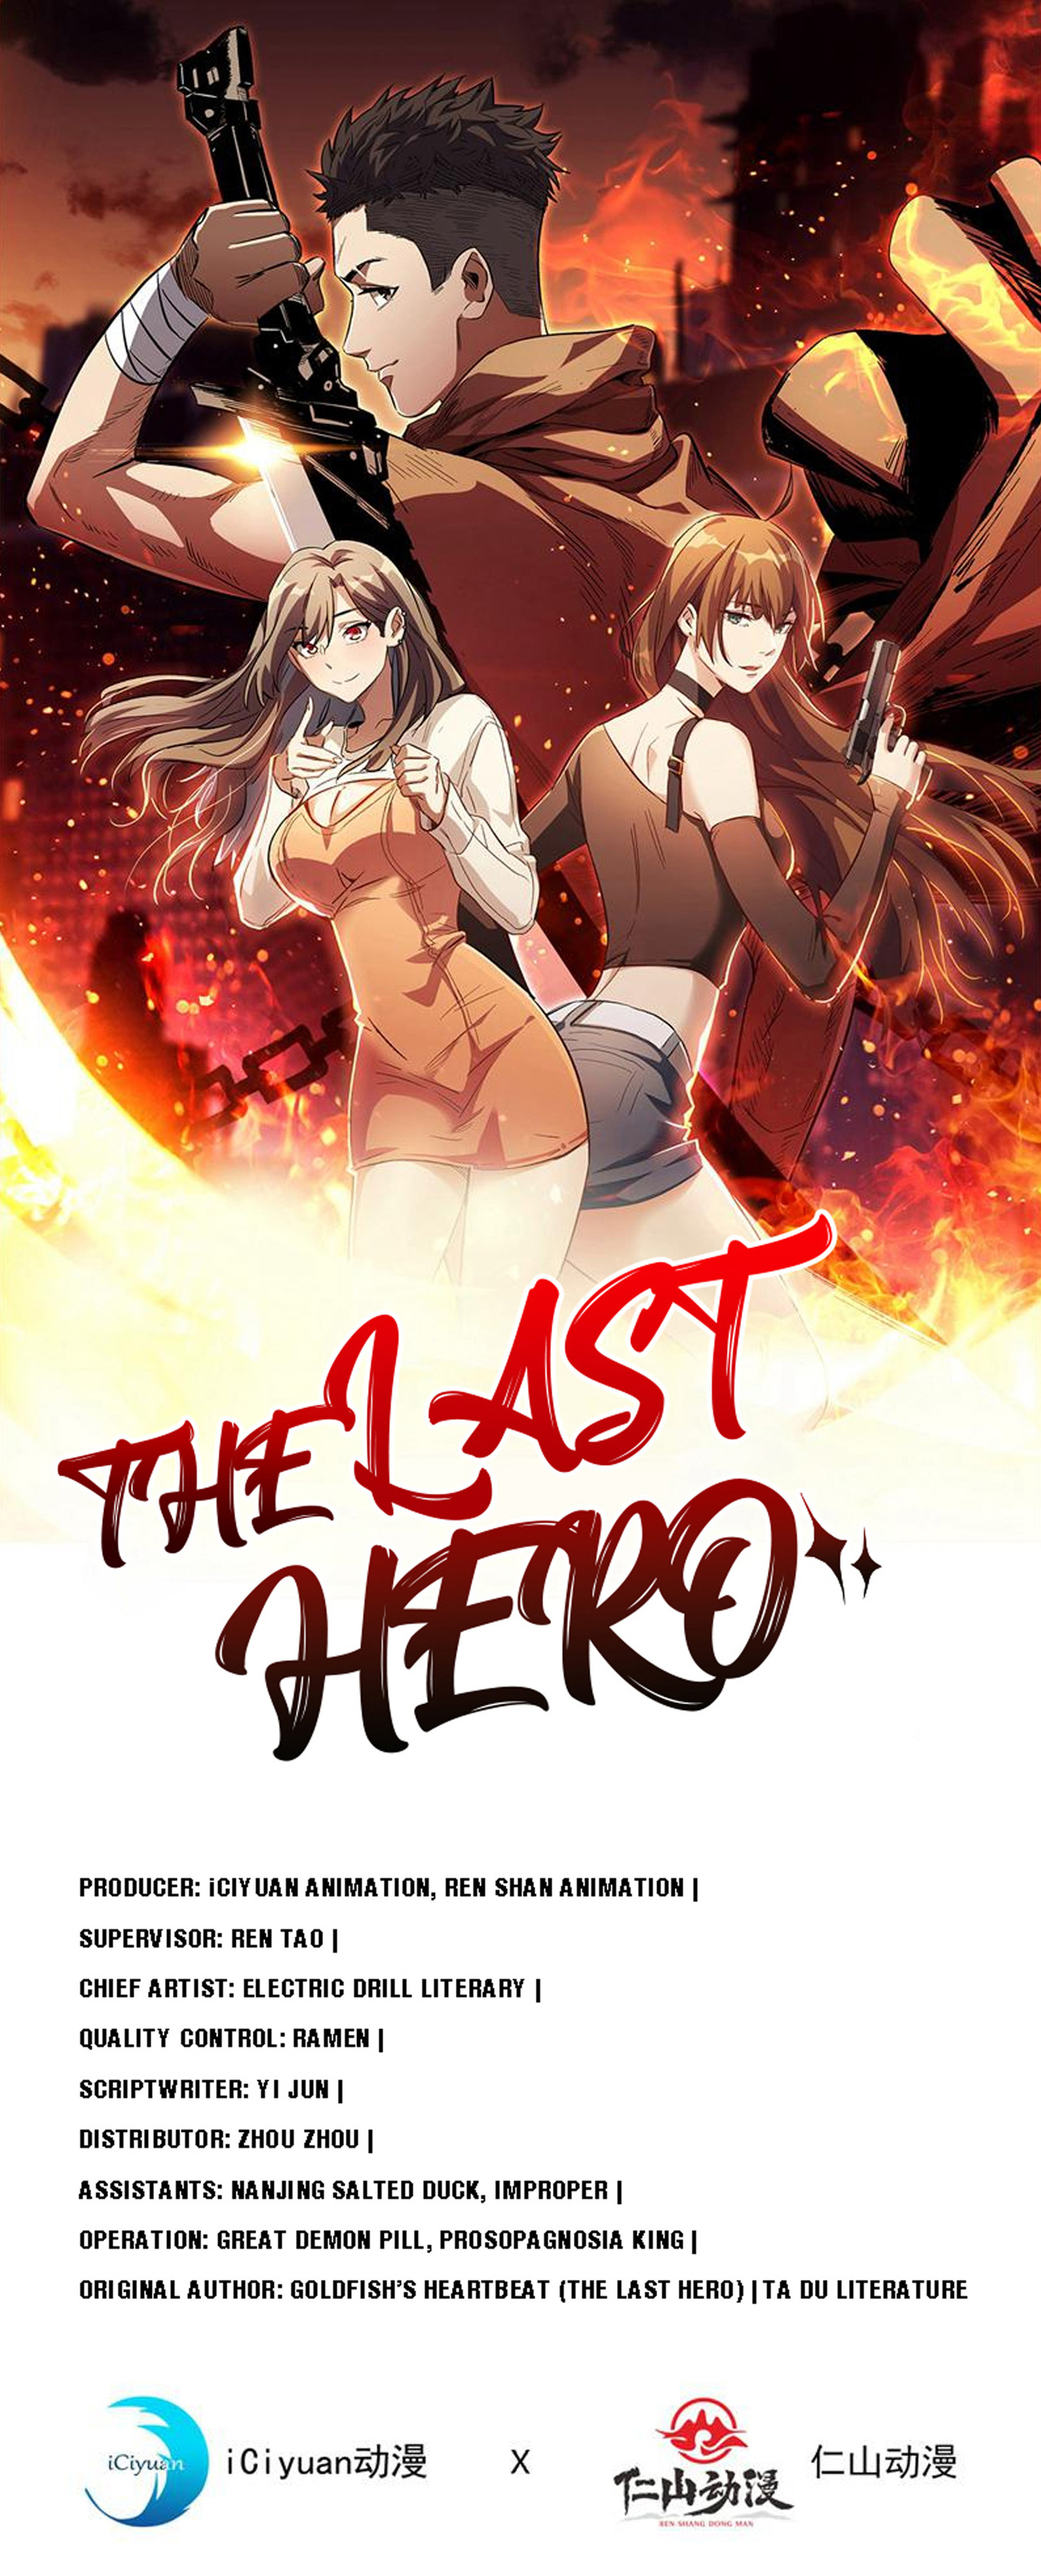 The Last Hero, I Am Picking up Attributes and Items in Last Days 147